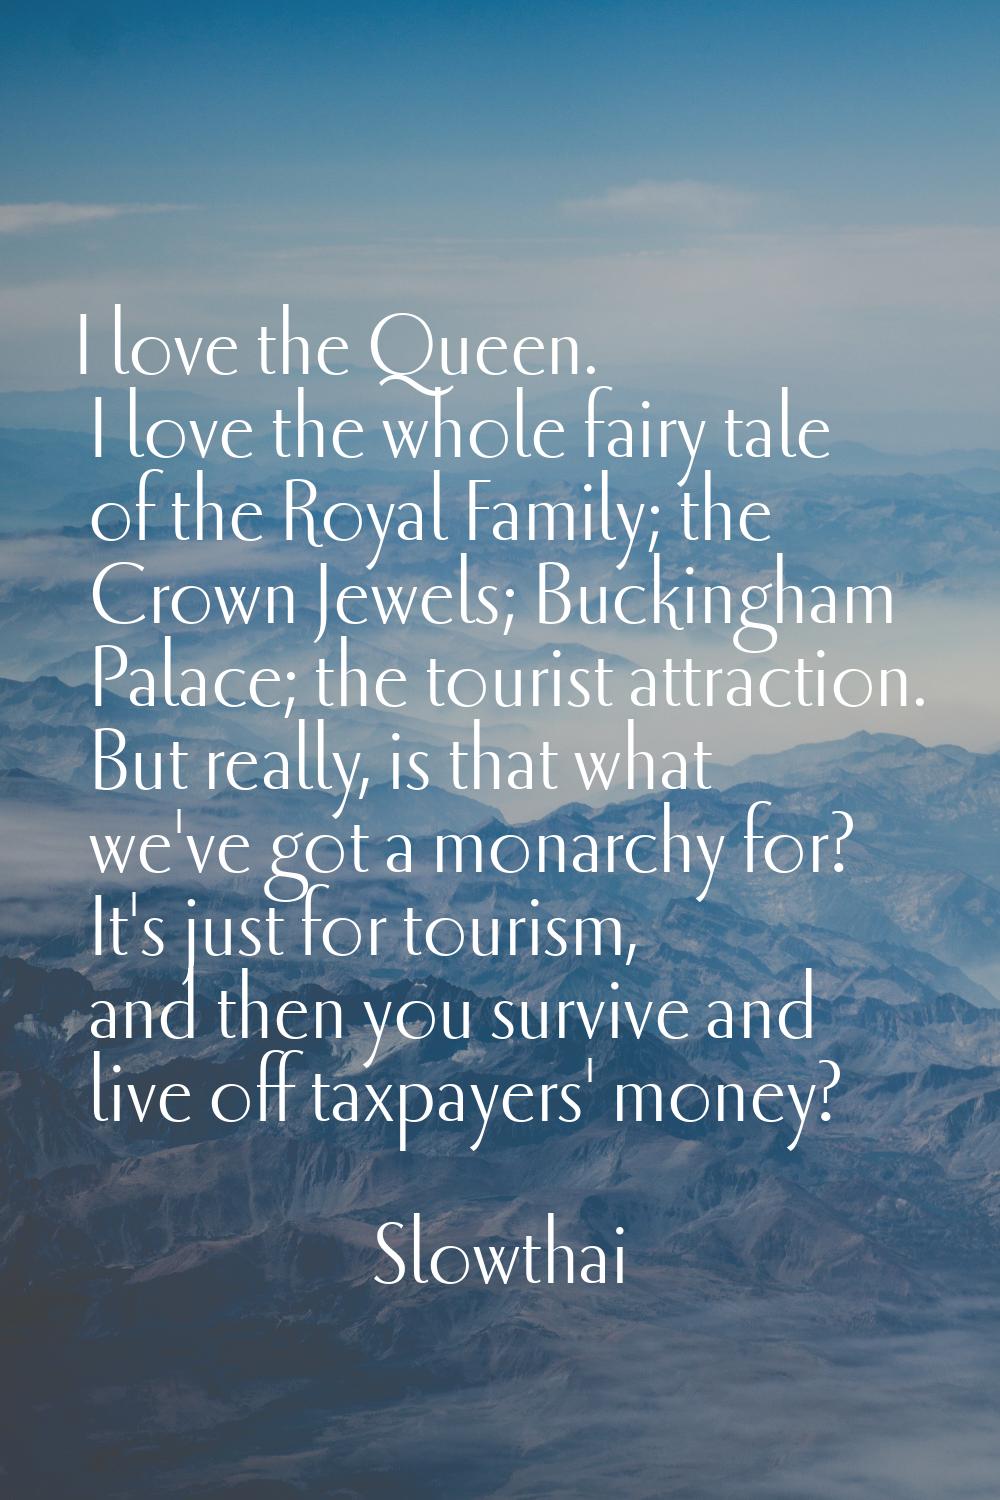 I love the Queen. I love the whole fairy tale of the Royal Family; the Crown Jewels; Buckingham Pal